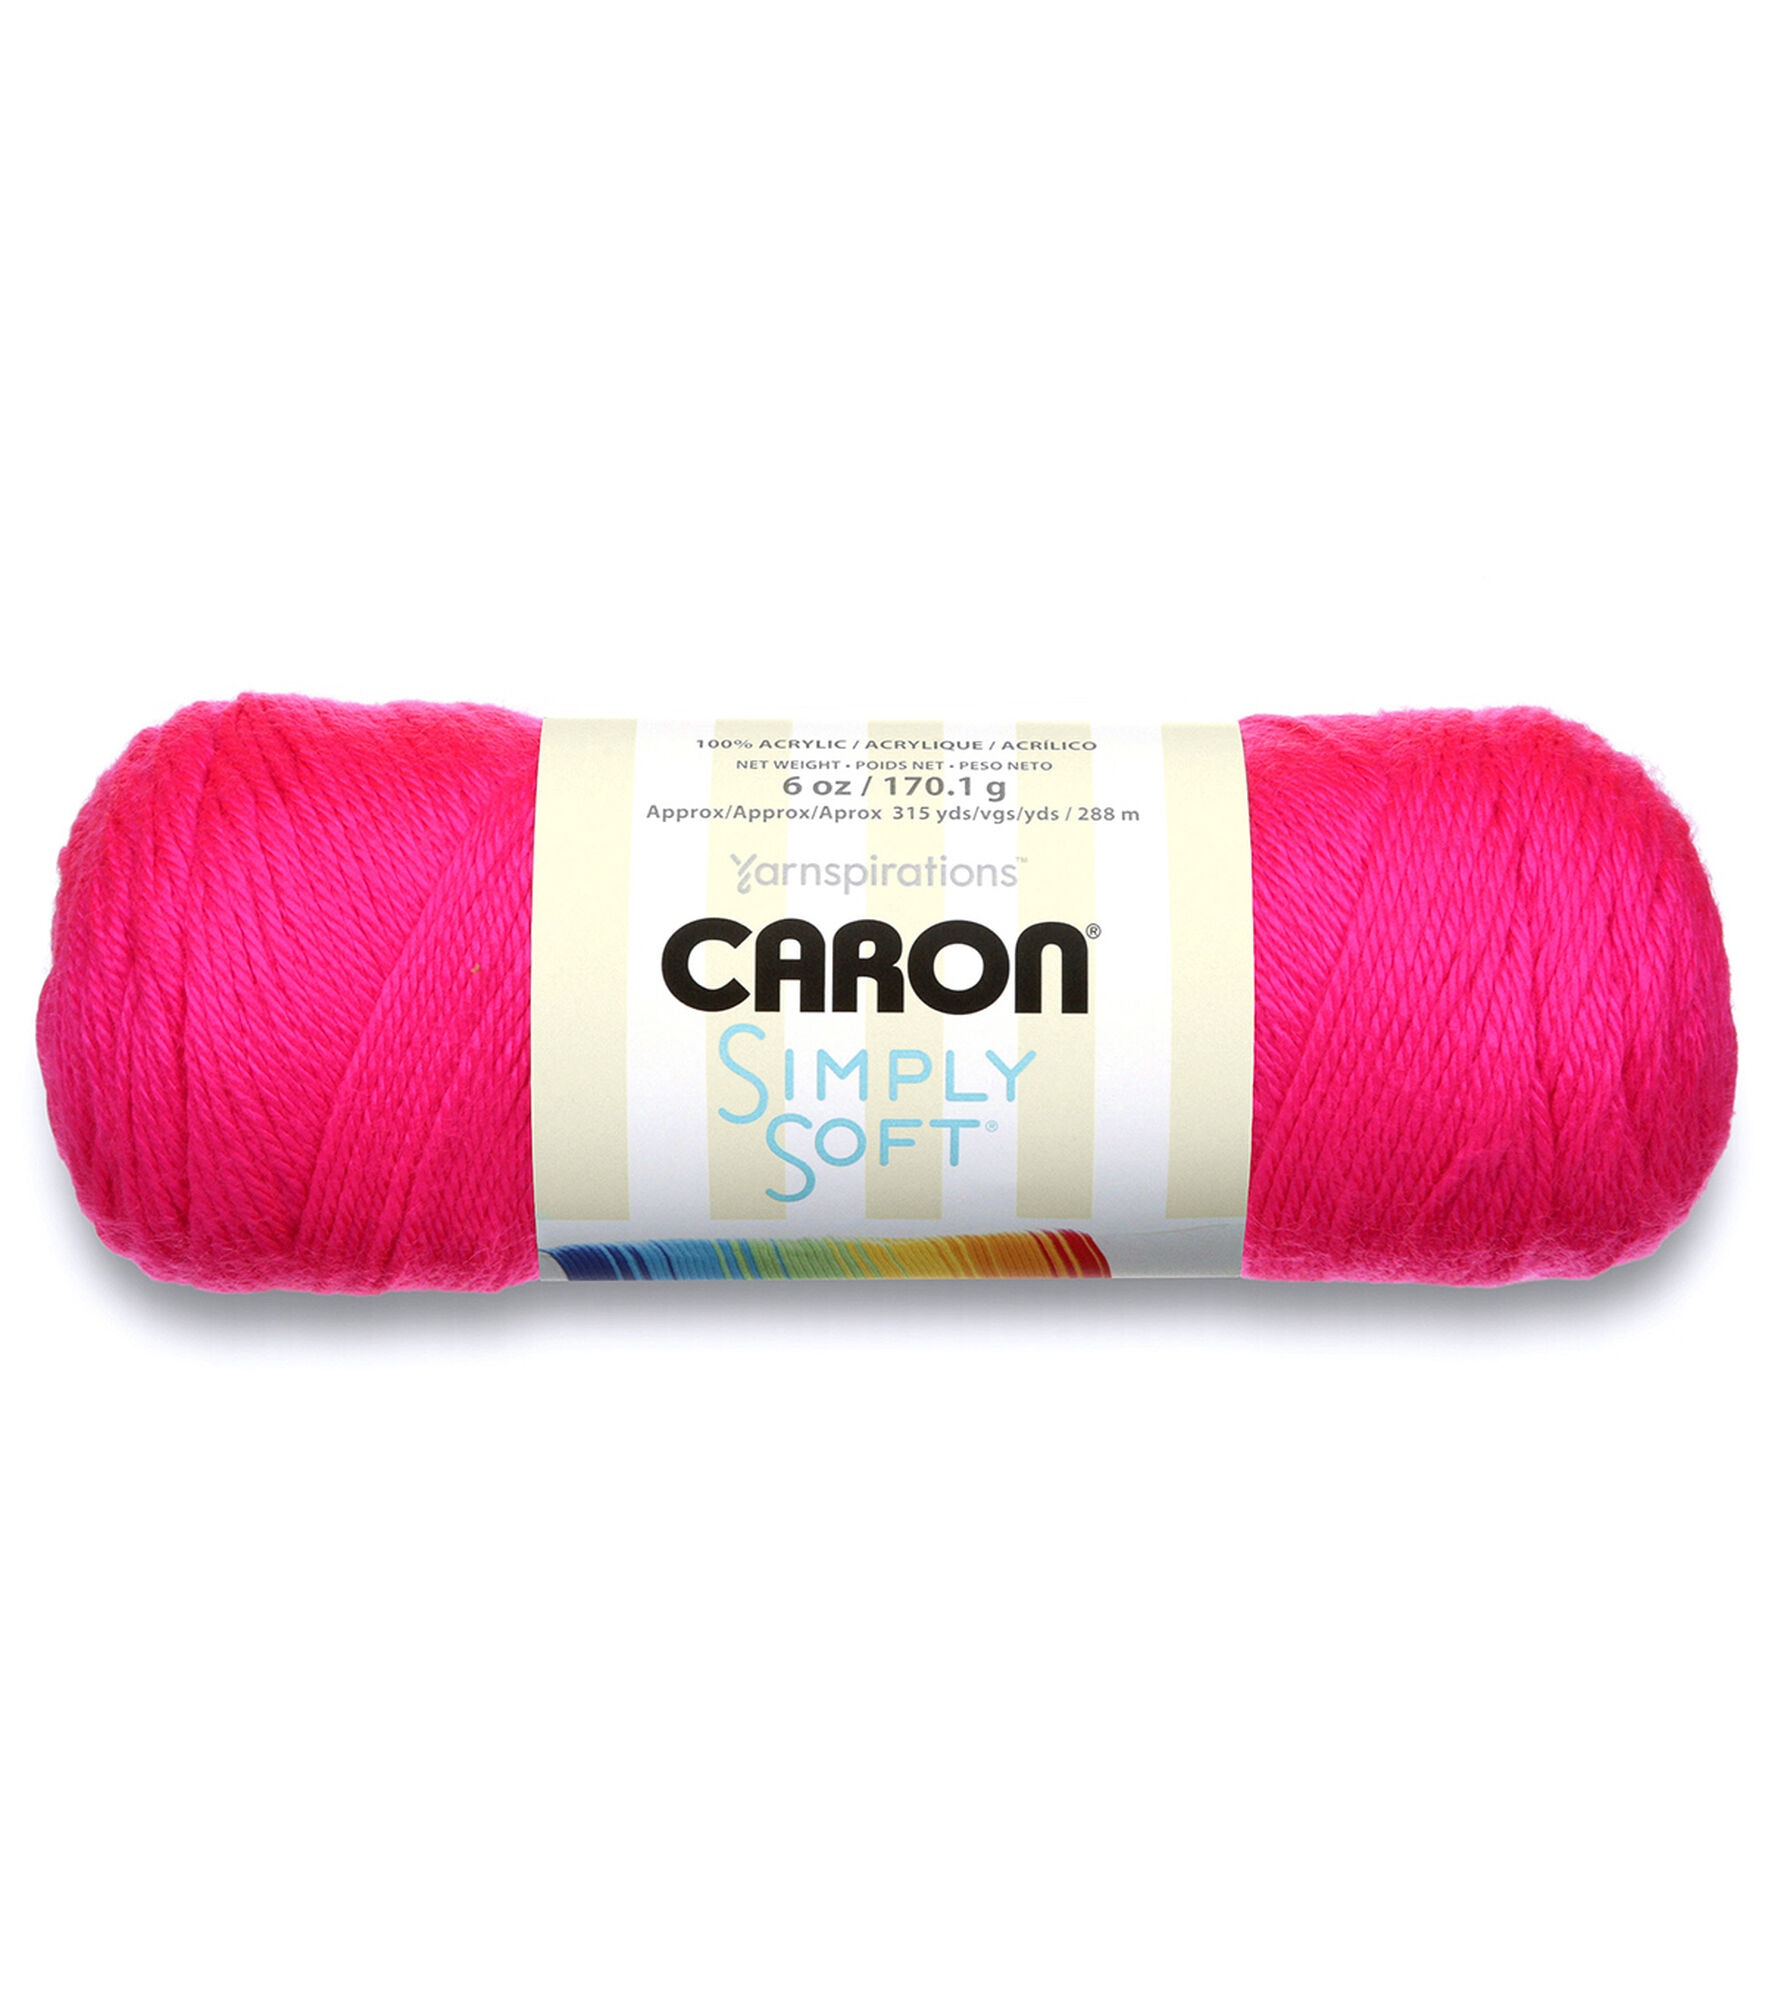 Caron Simply Soft 315yds Worsted Acrylic Yarn, Neon Pink, hi-res